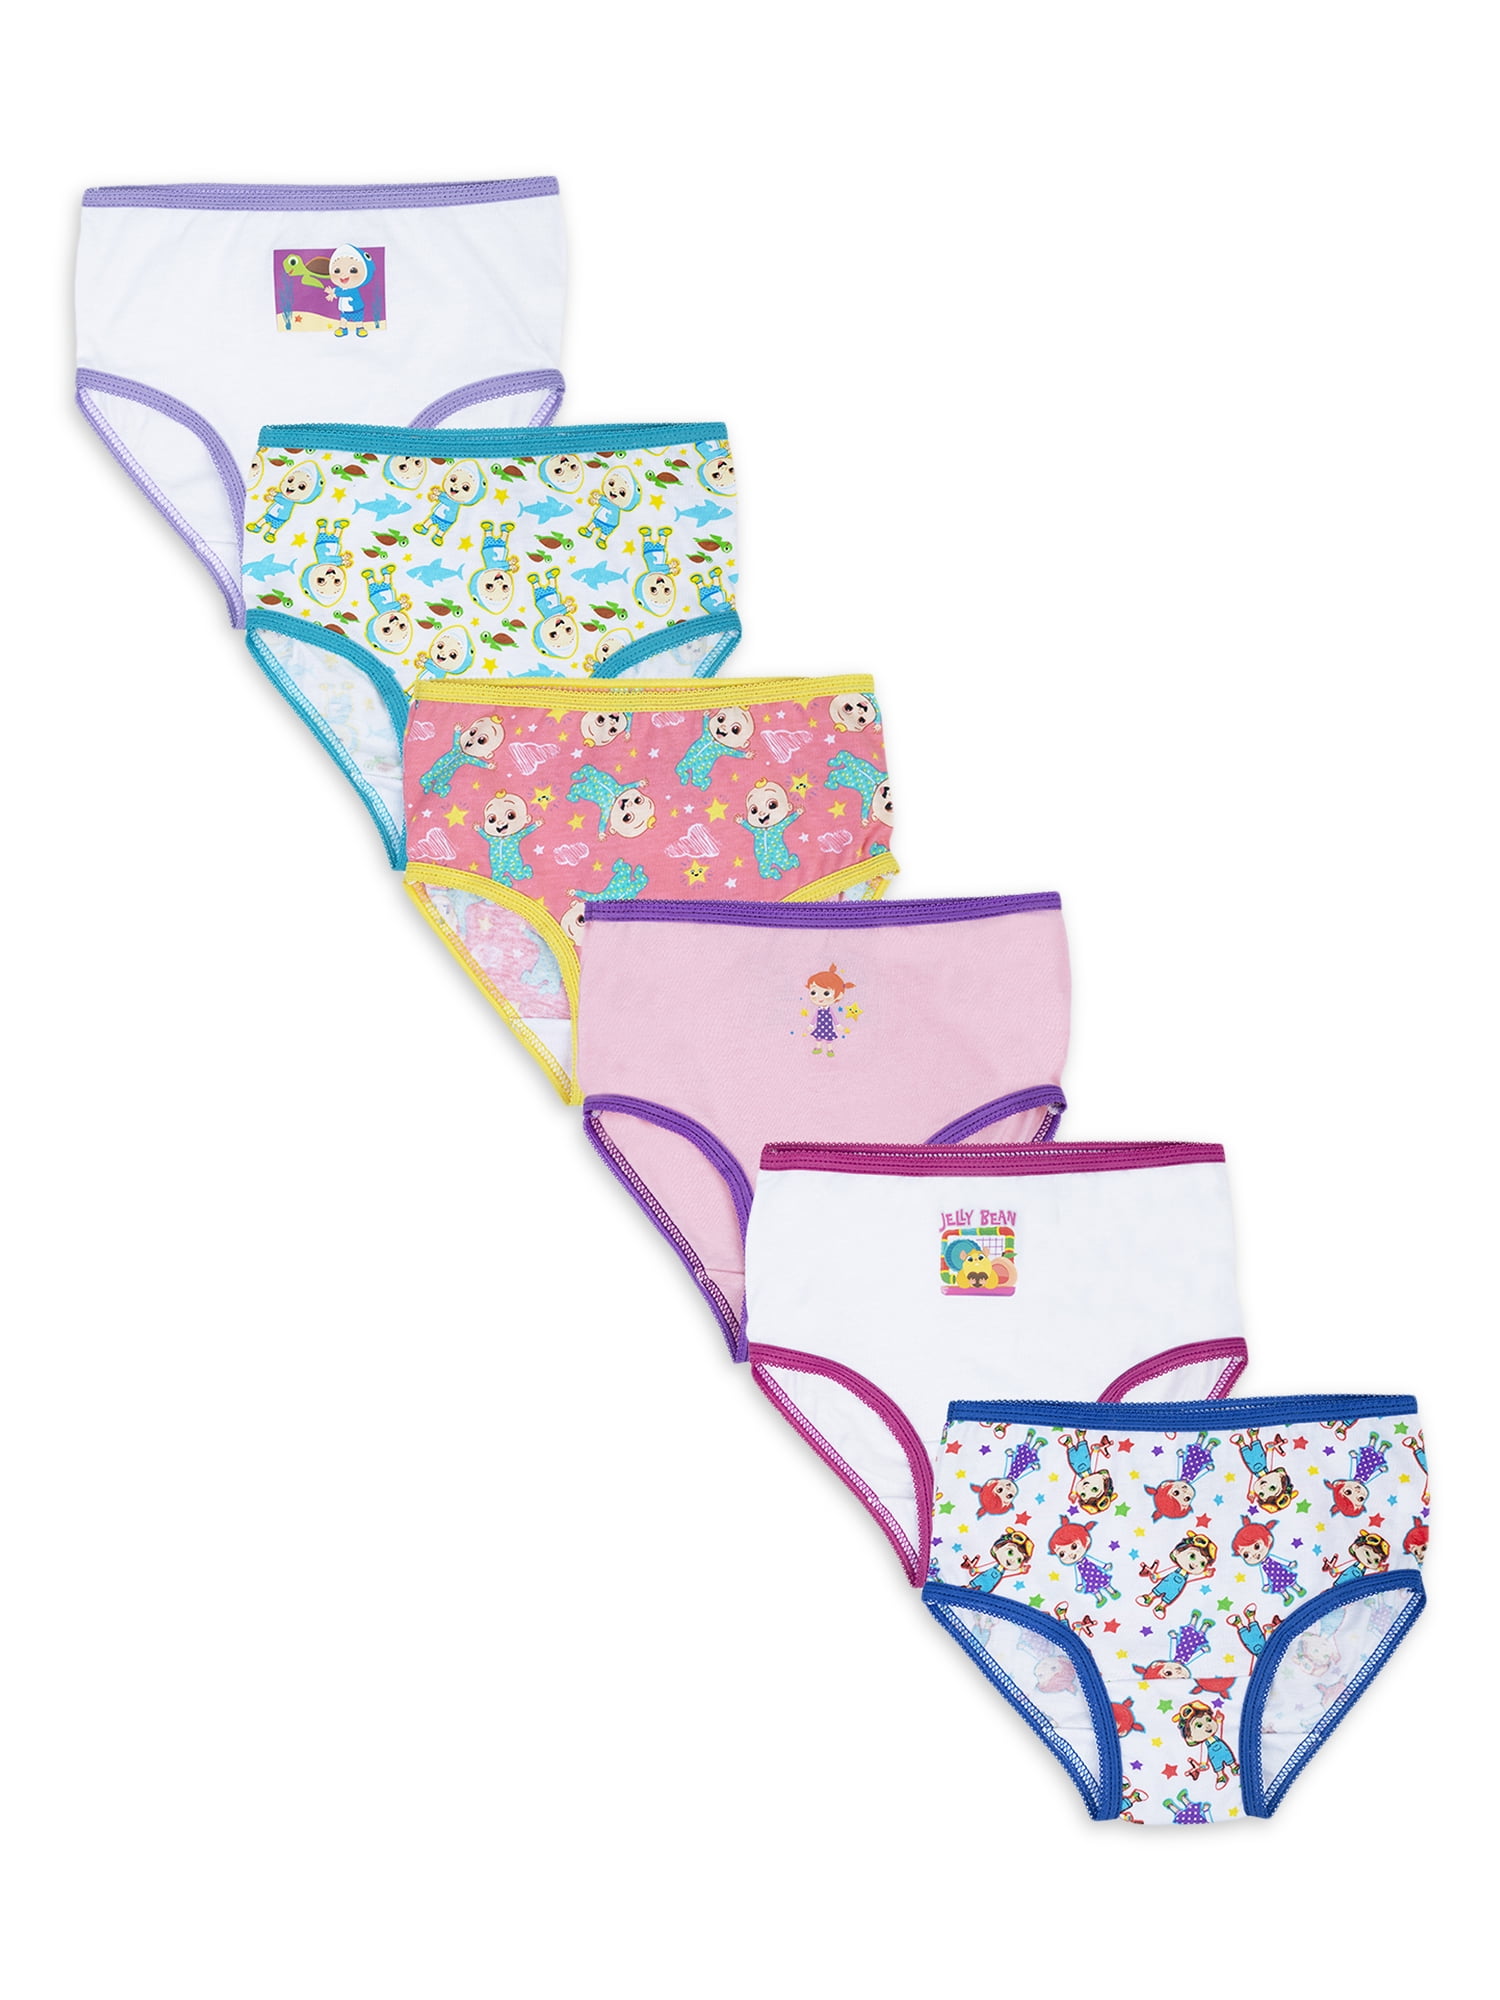 Cocomelon Toddler Girls' Underwear, 6 Pack Sizes 2T-4T